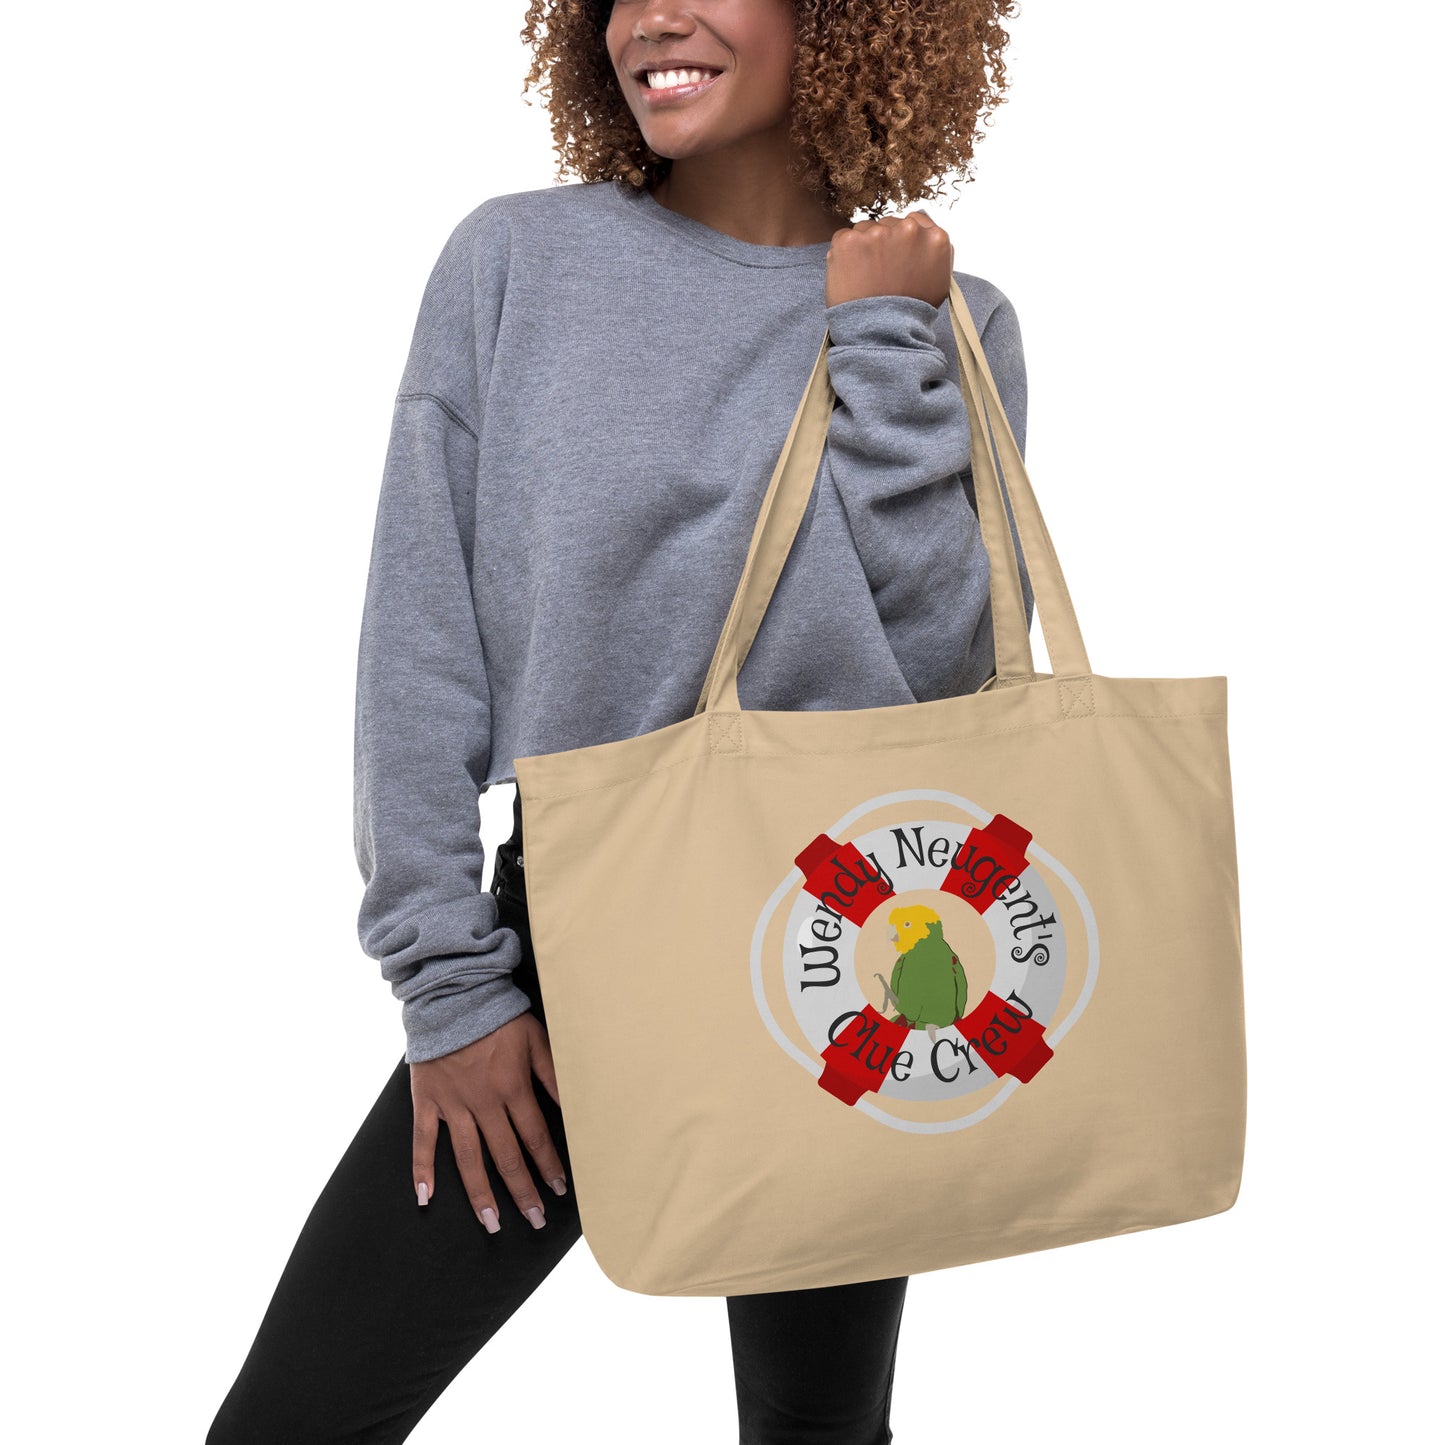 Wendy Neugent's Clue Crew Large organic tote bag